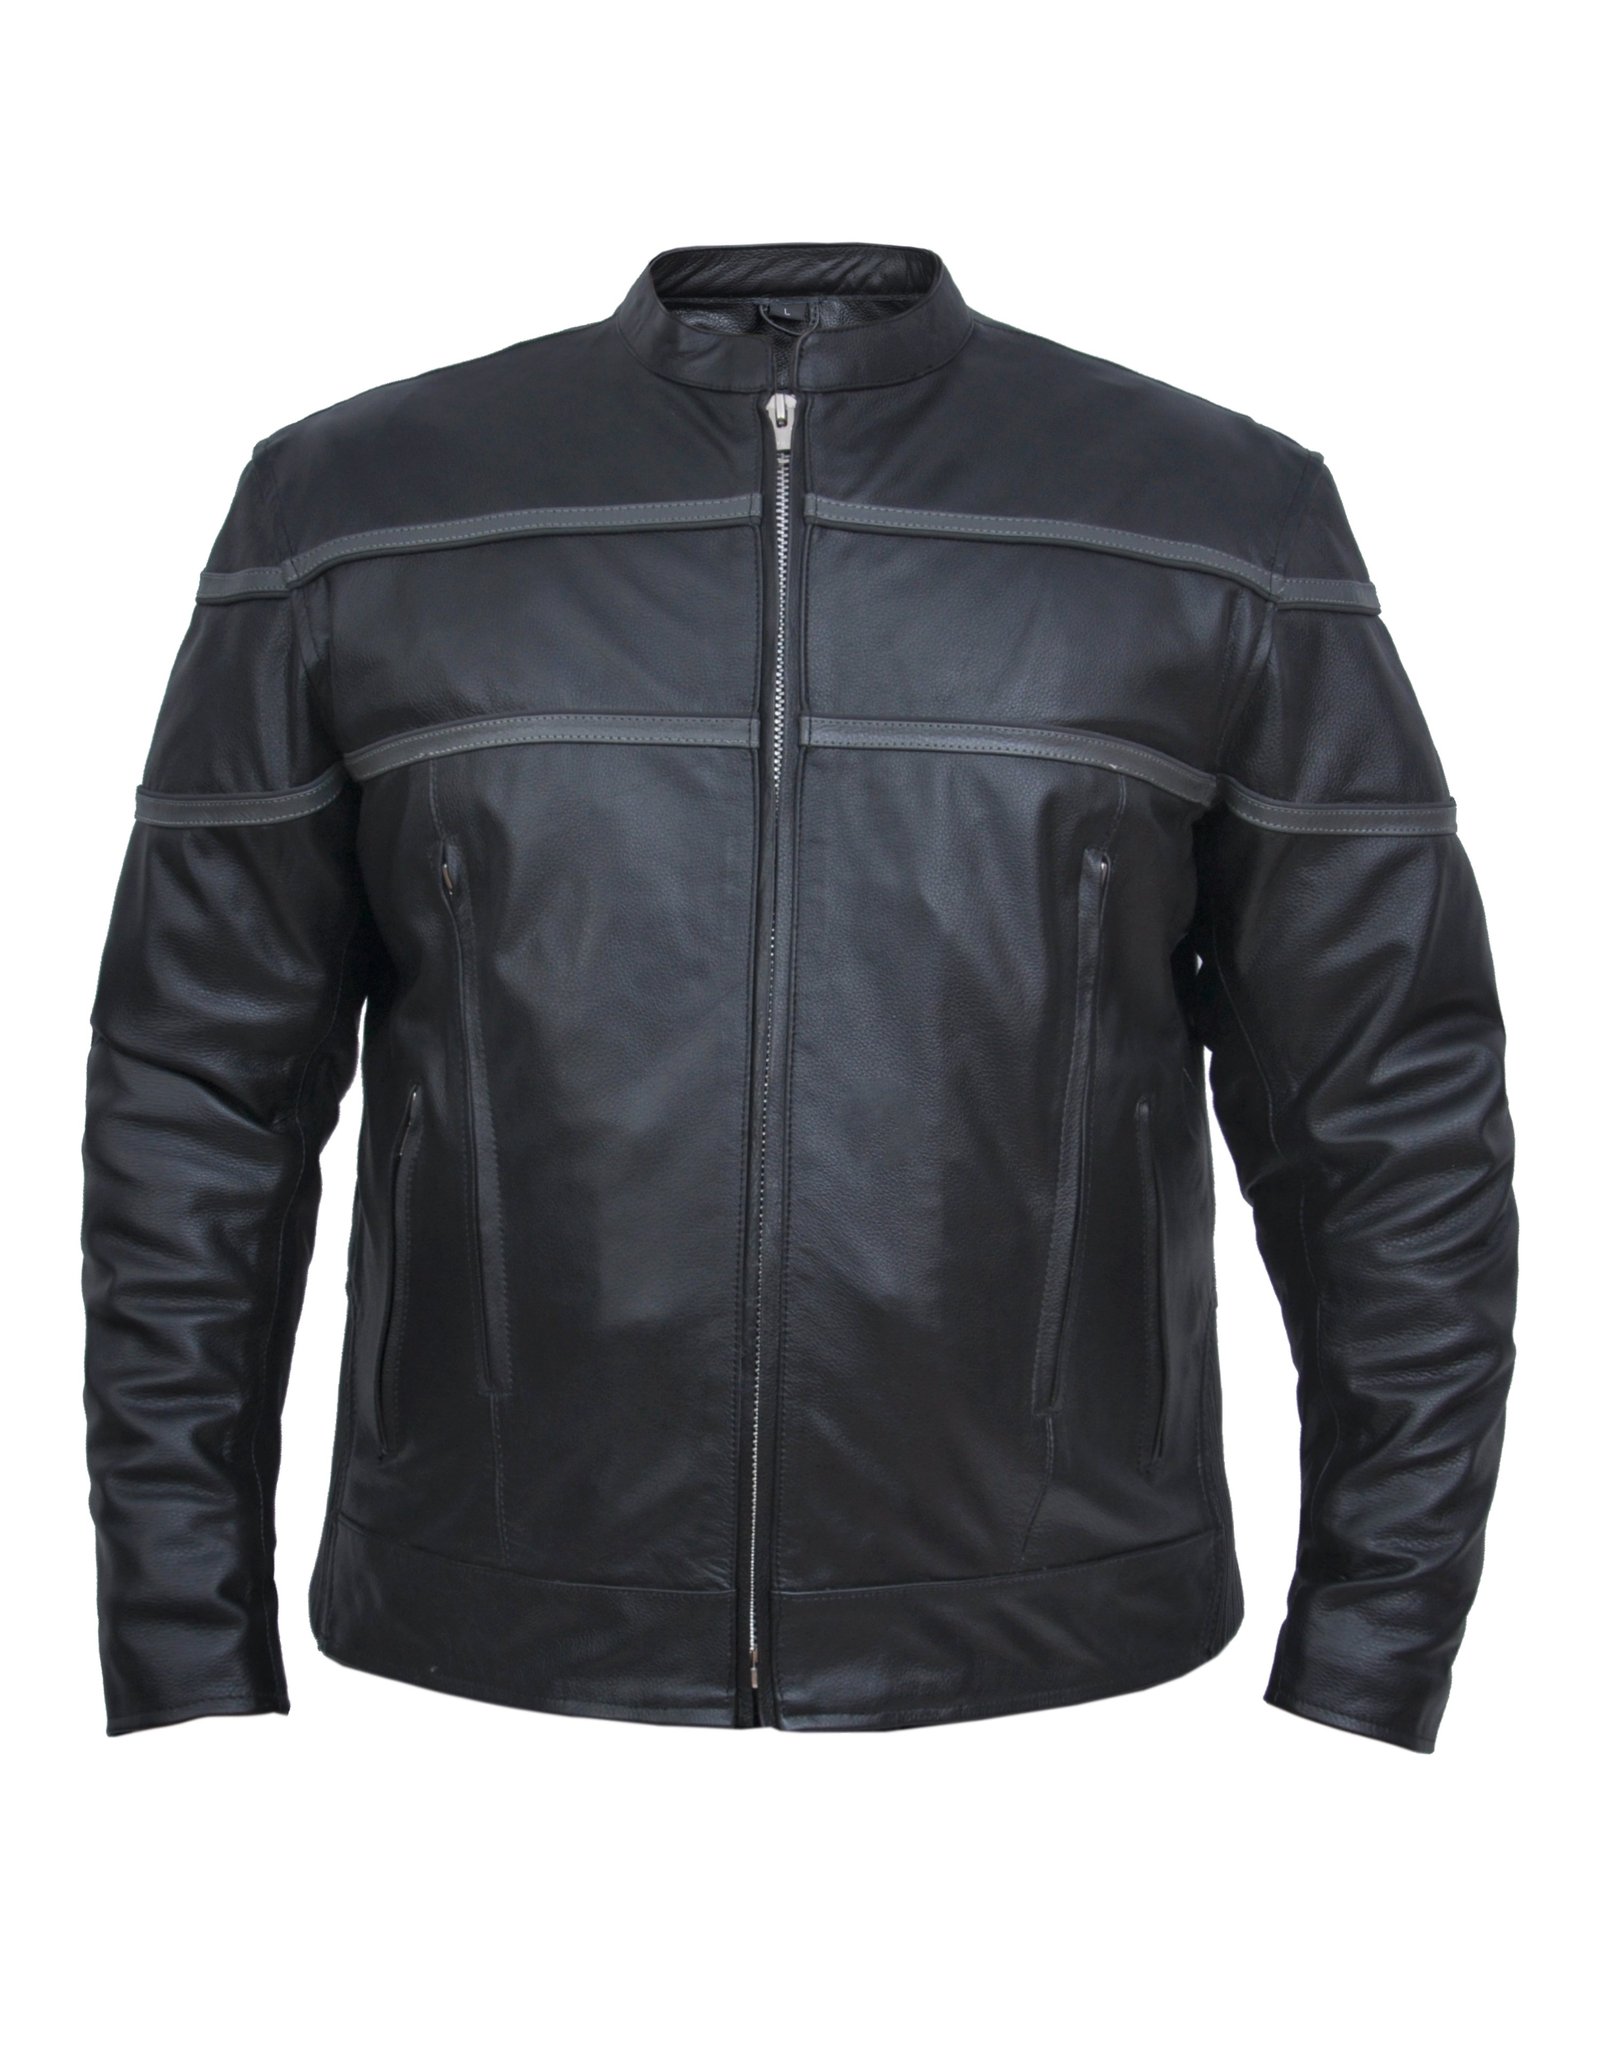 Leather Motorcycle Jacket - Men's - Lightweight - Two Tone - Black With Gray - 6049-18-UN